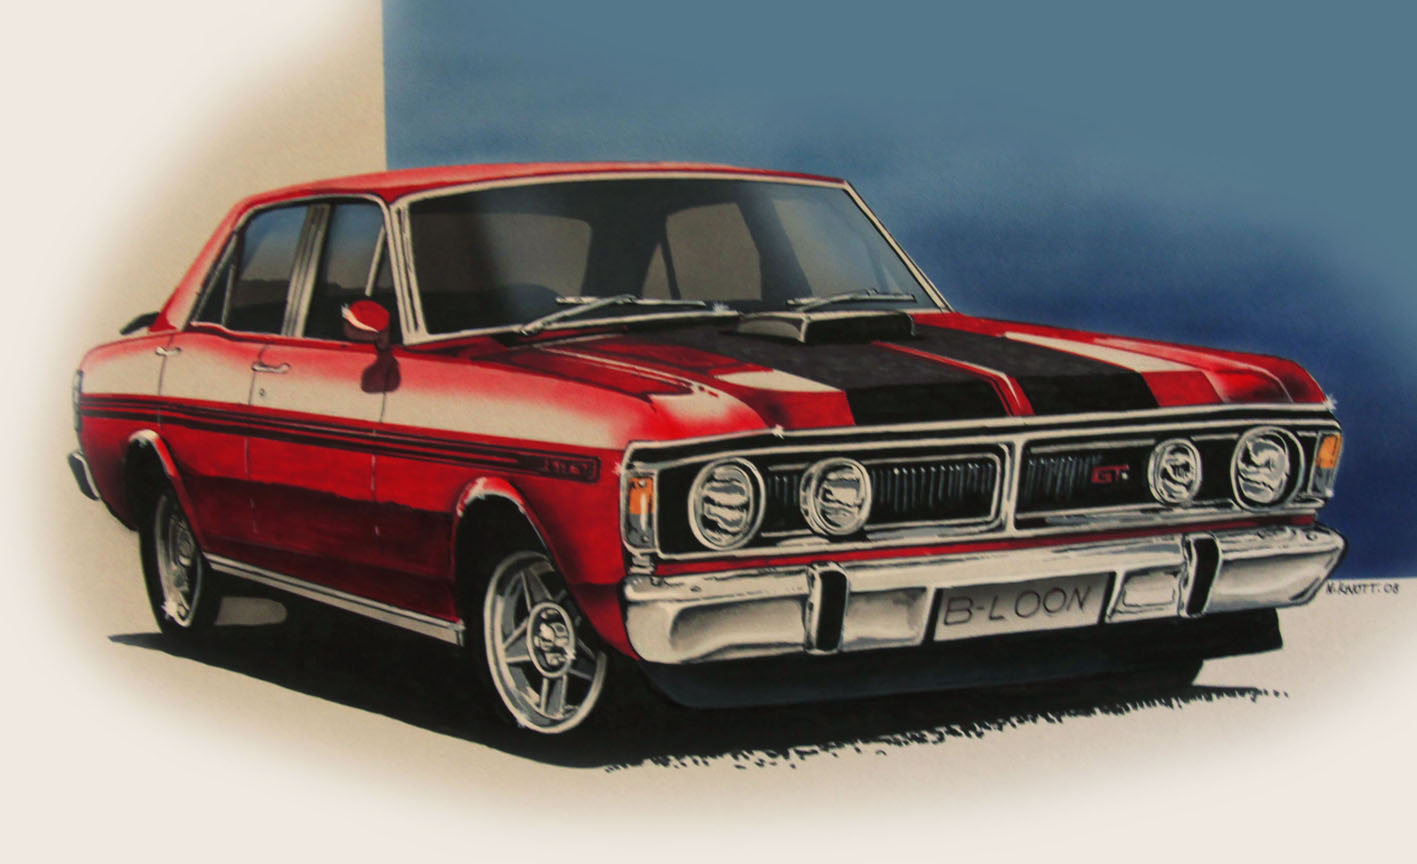 Xy Ford Falcon Phase Iii Gtho Puter Wallpaper Desktop Background